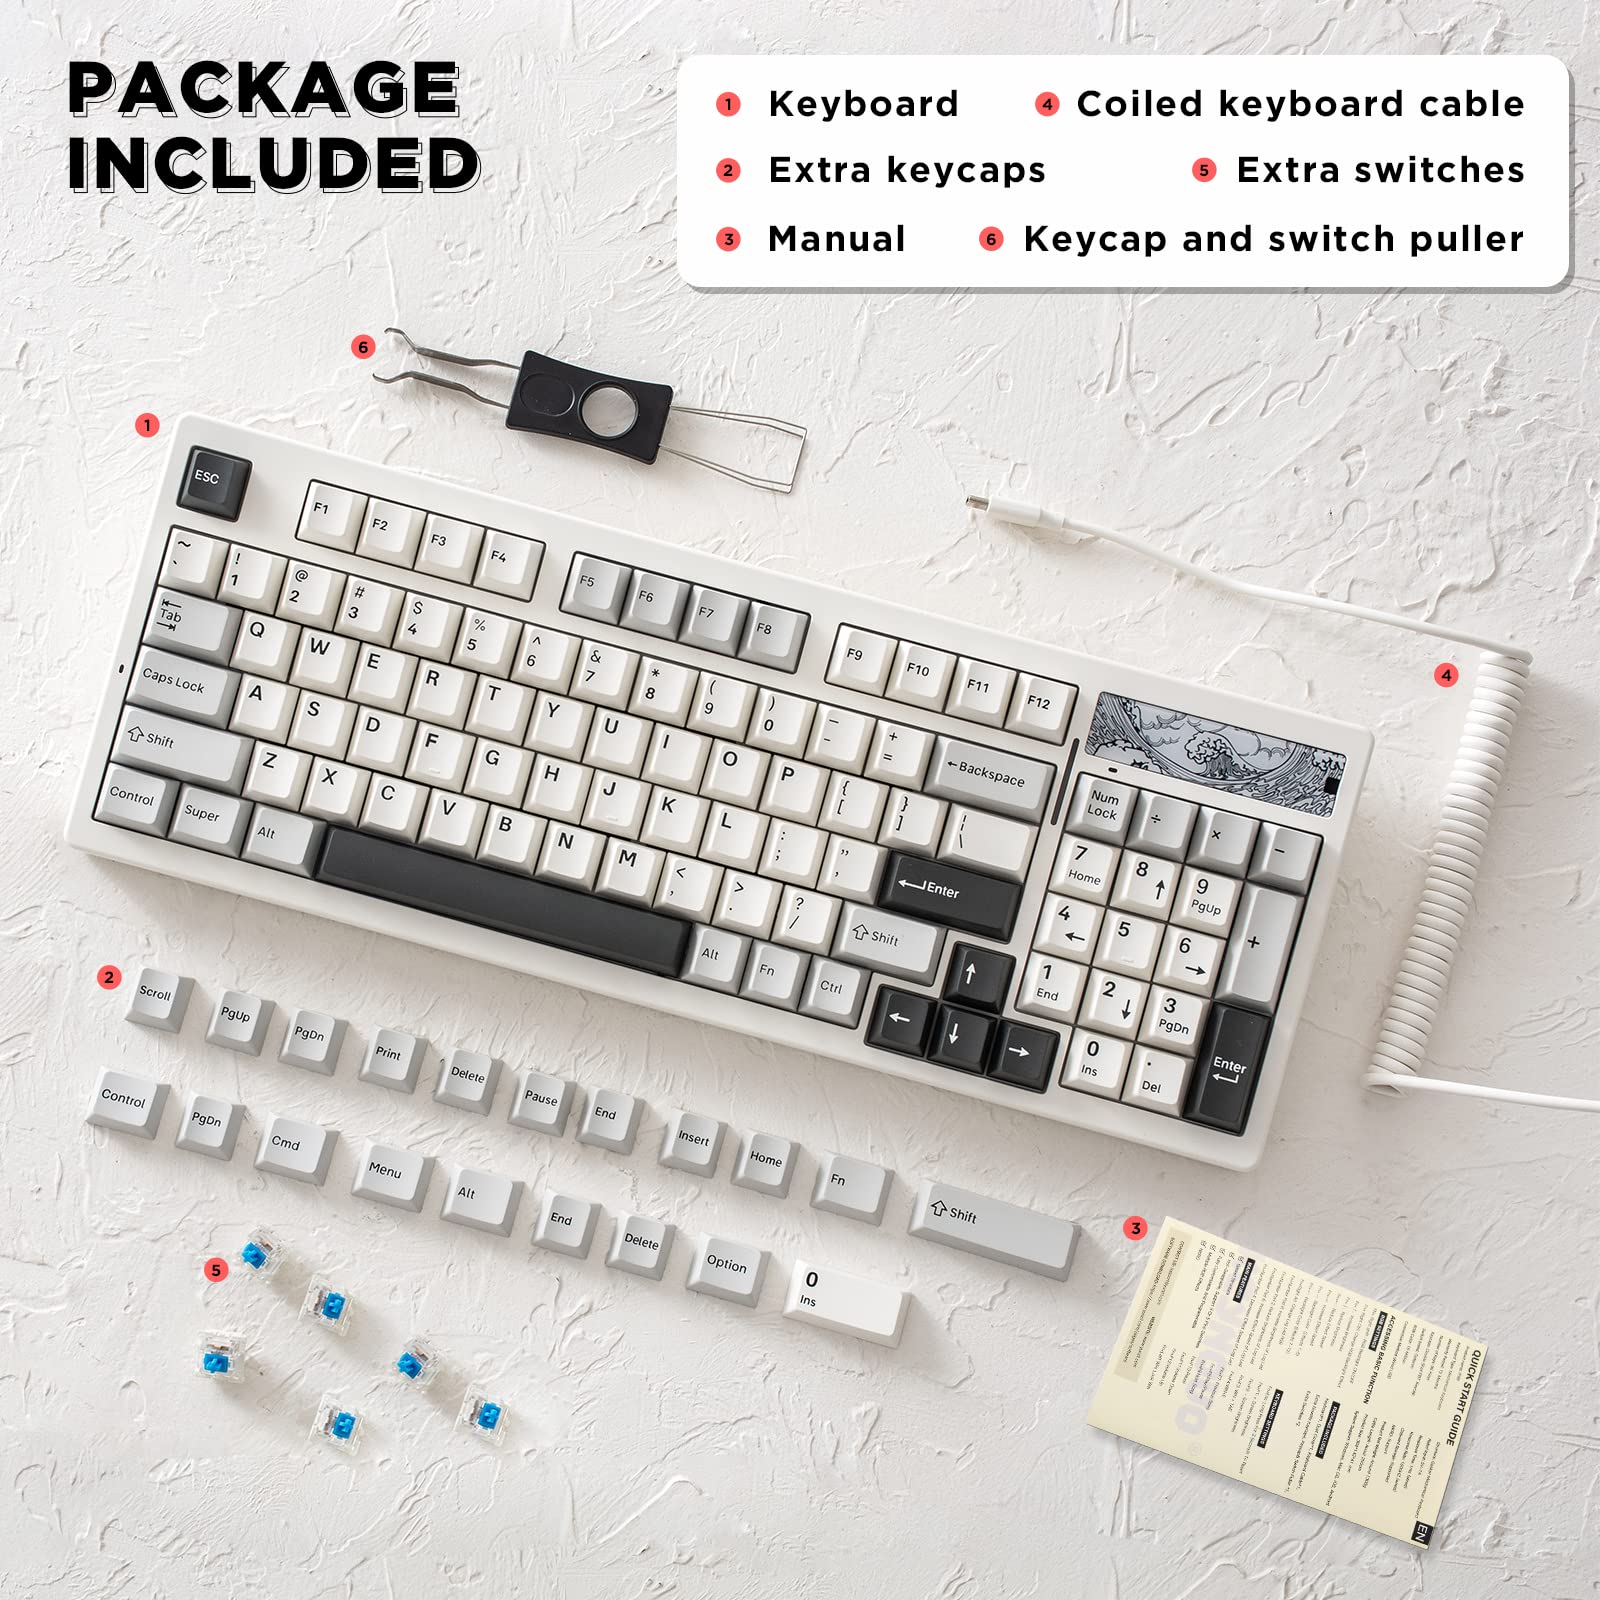 YUNZII Keynovo IF98 98 Key 96% 1800 Hot Swappable Gasket Mechanical Gaming Keyboard with Double Shot PBT Keycaps, RGB Backlight for Mac & Win (Custom Linear Switch, White)